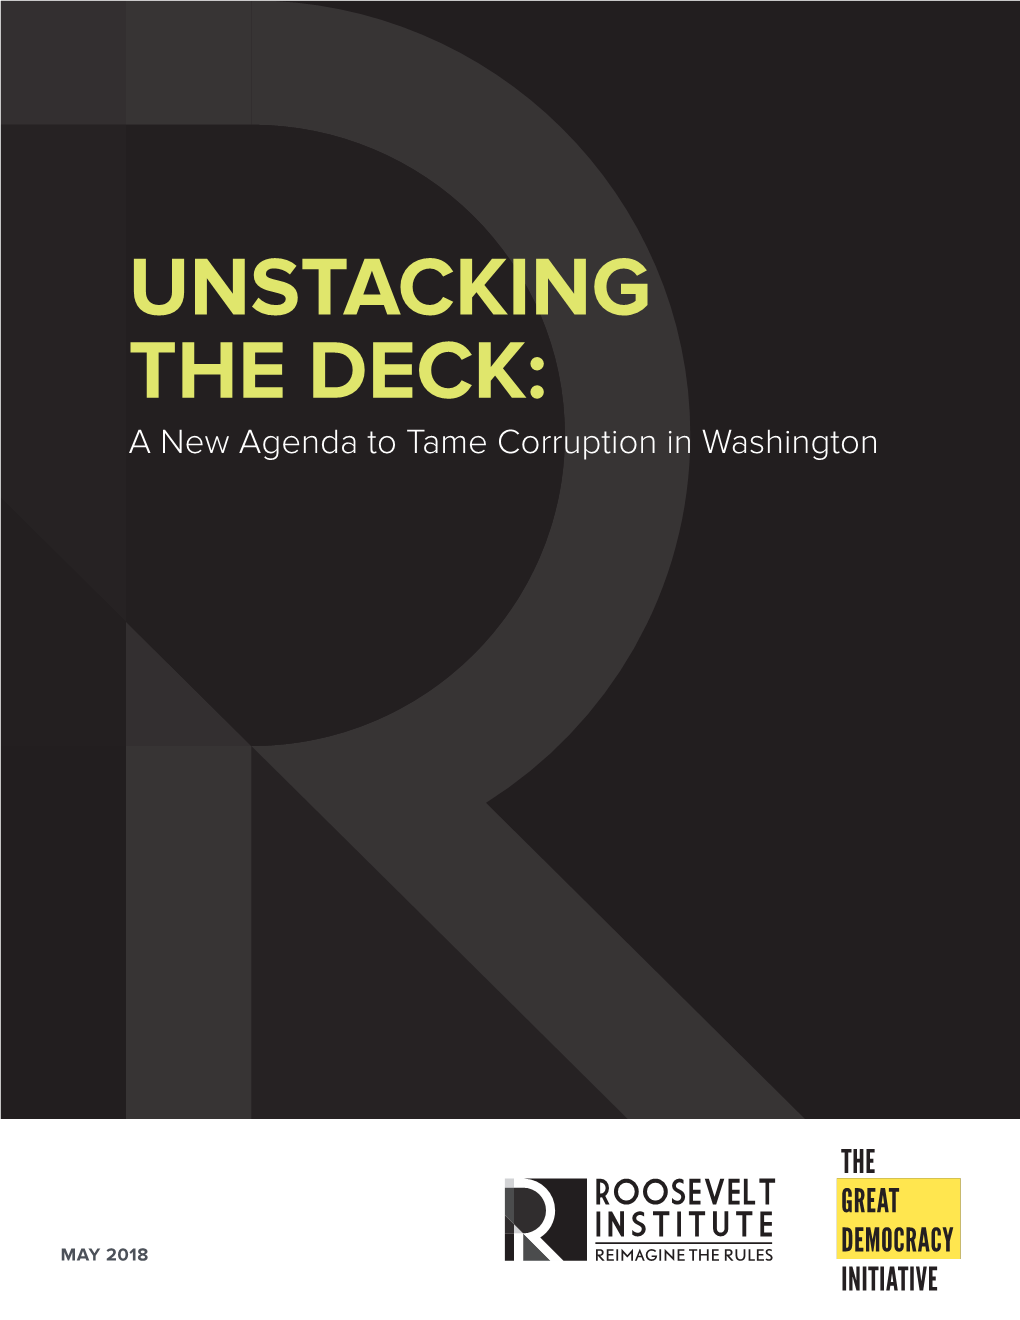 UNSTACKING the DECK: a New Agenda to Tame Corruption in Washington